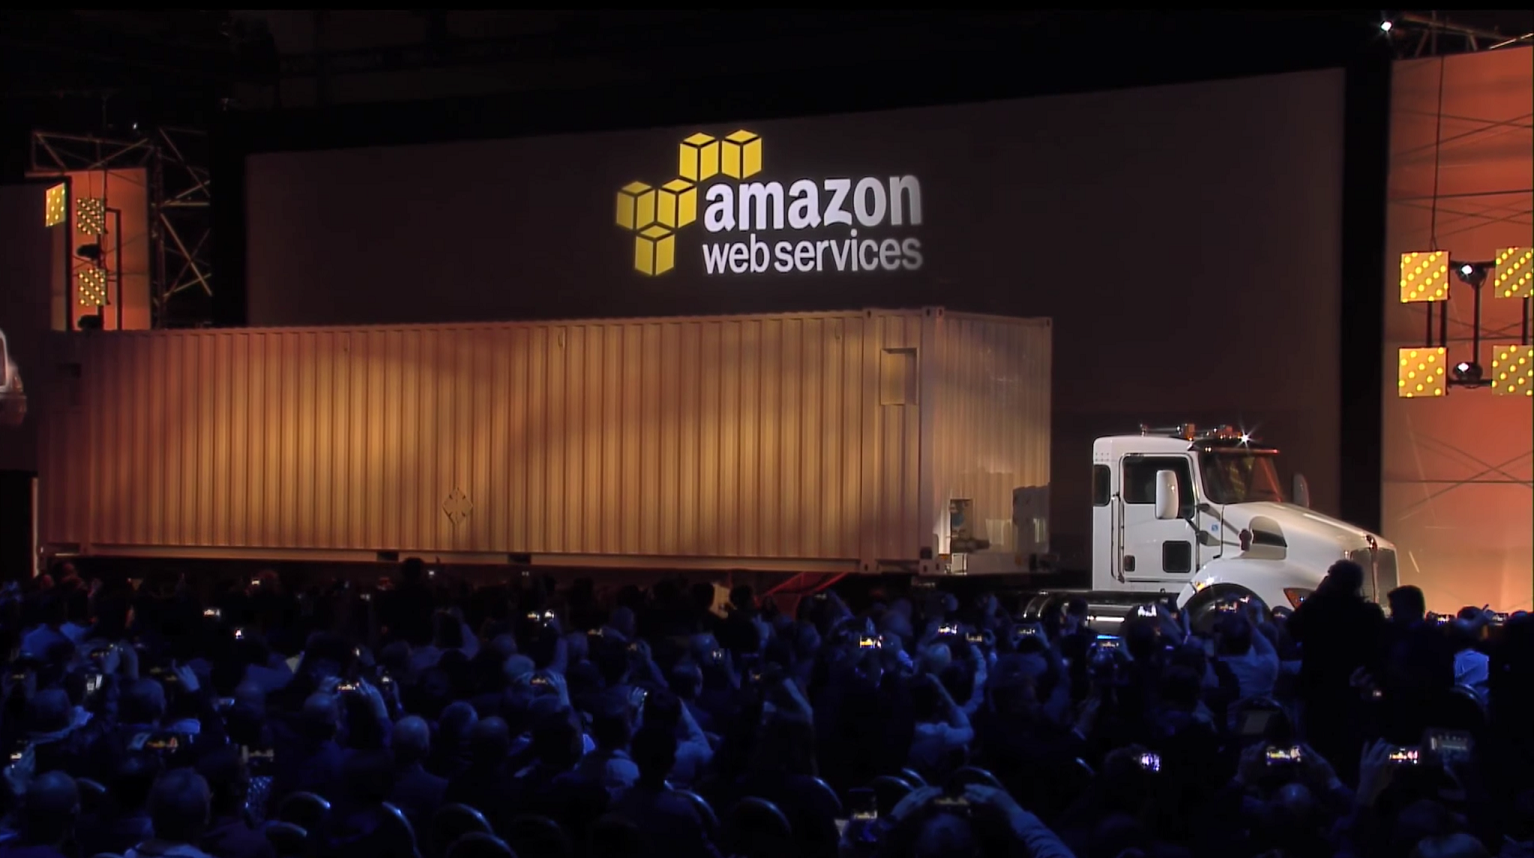 Hedging its bets, AWS evolves into holistic cloud provider